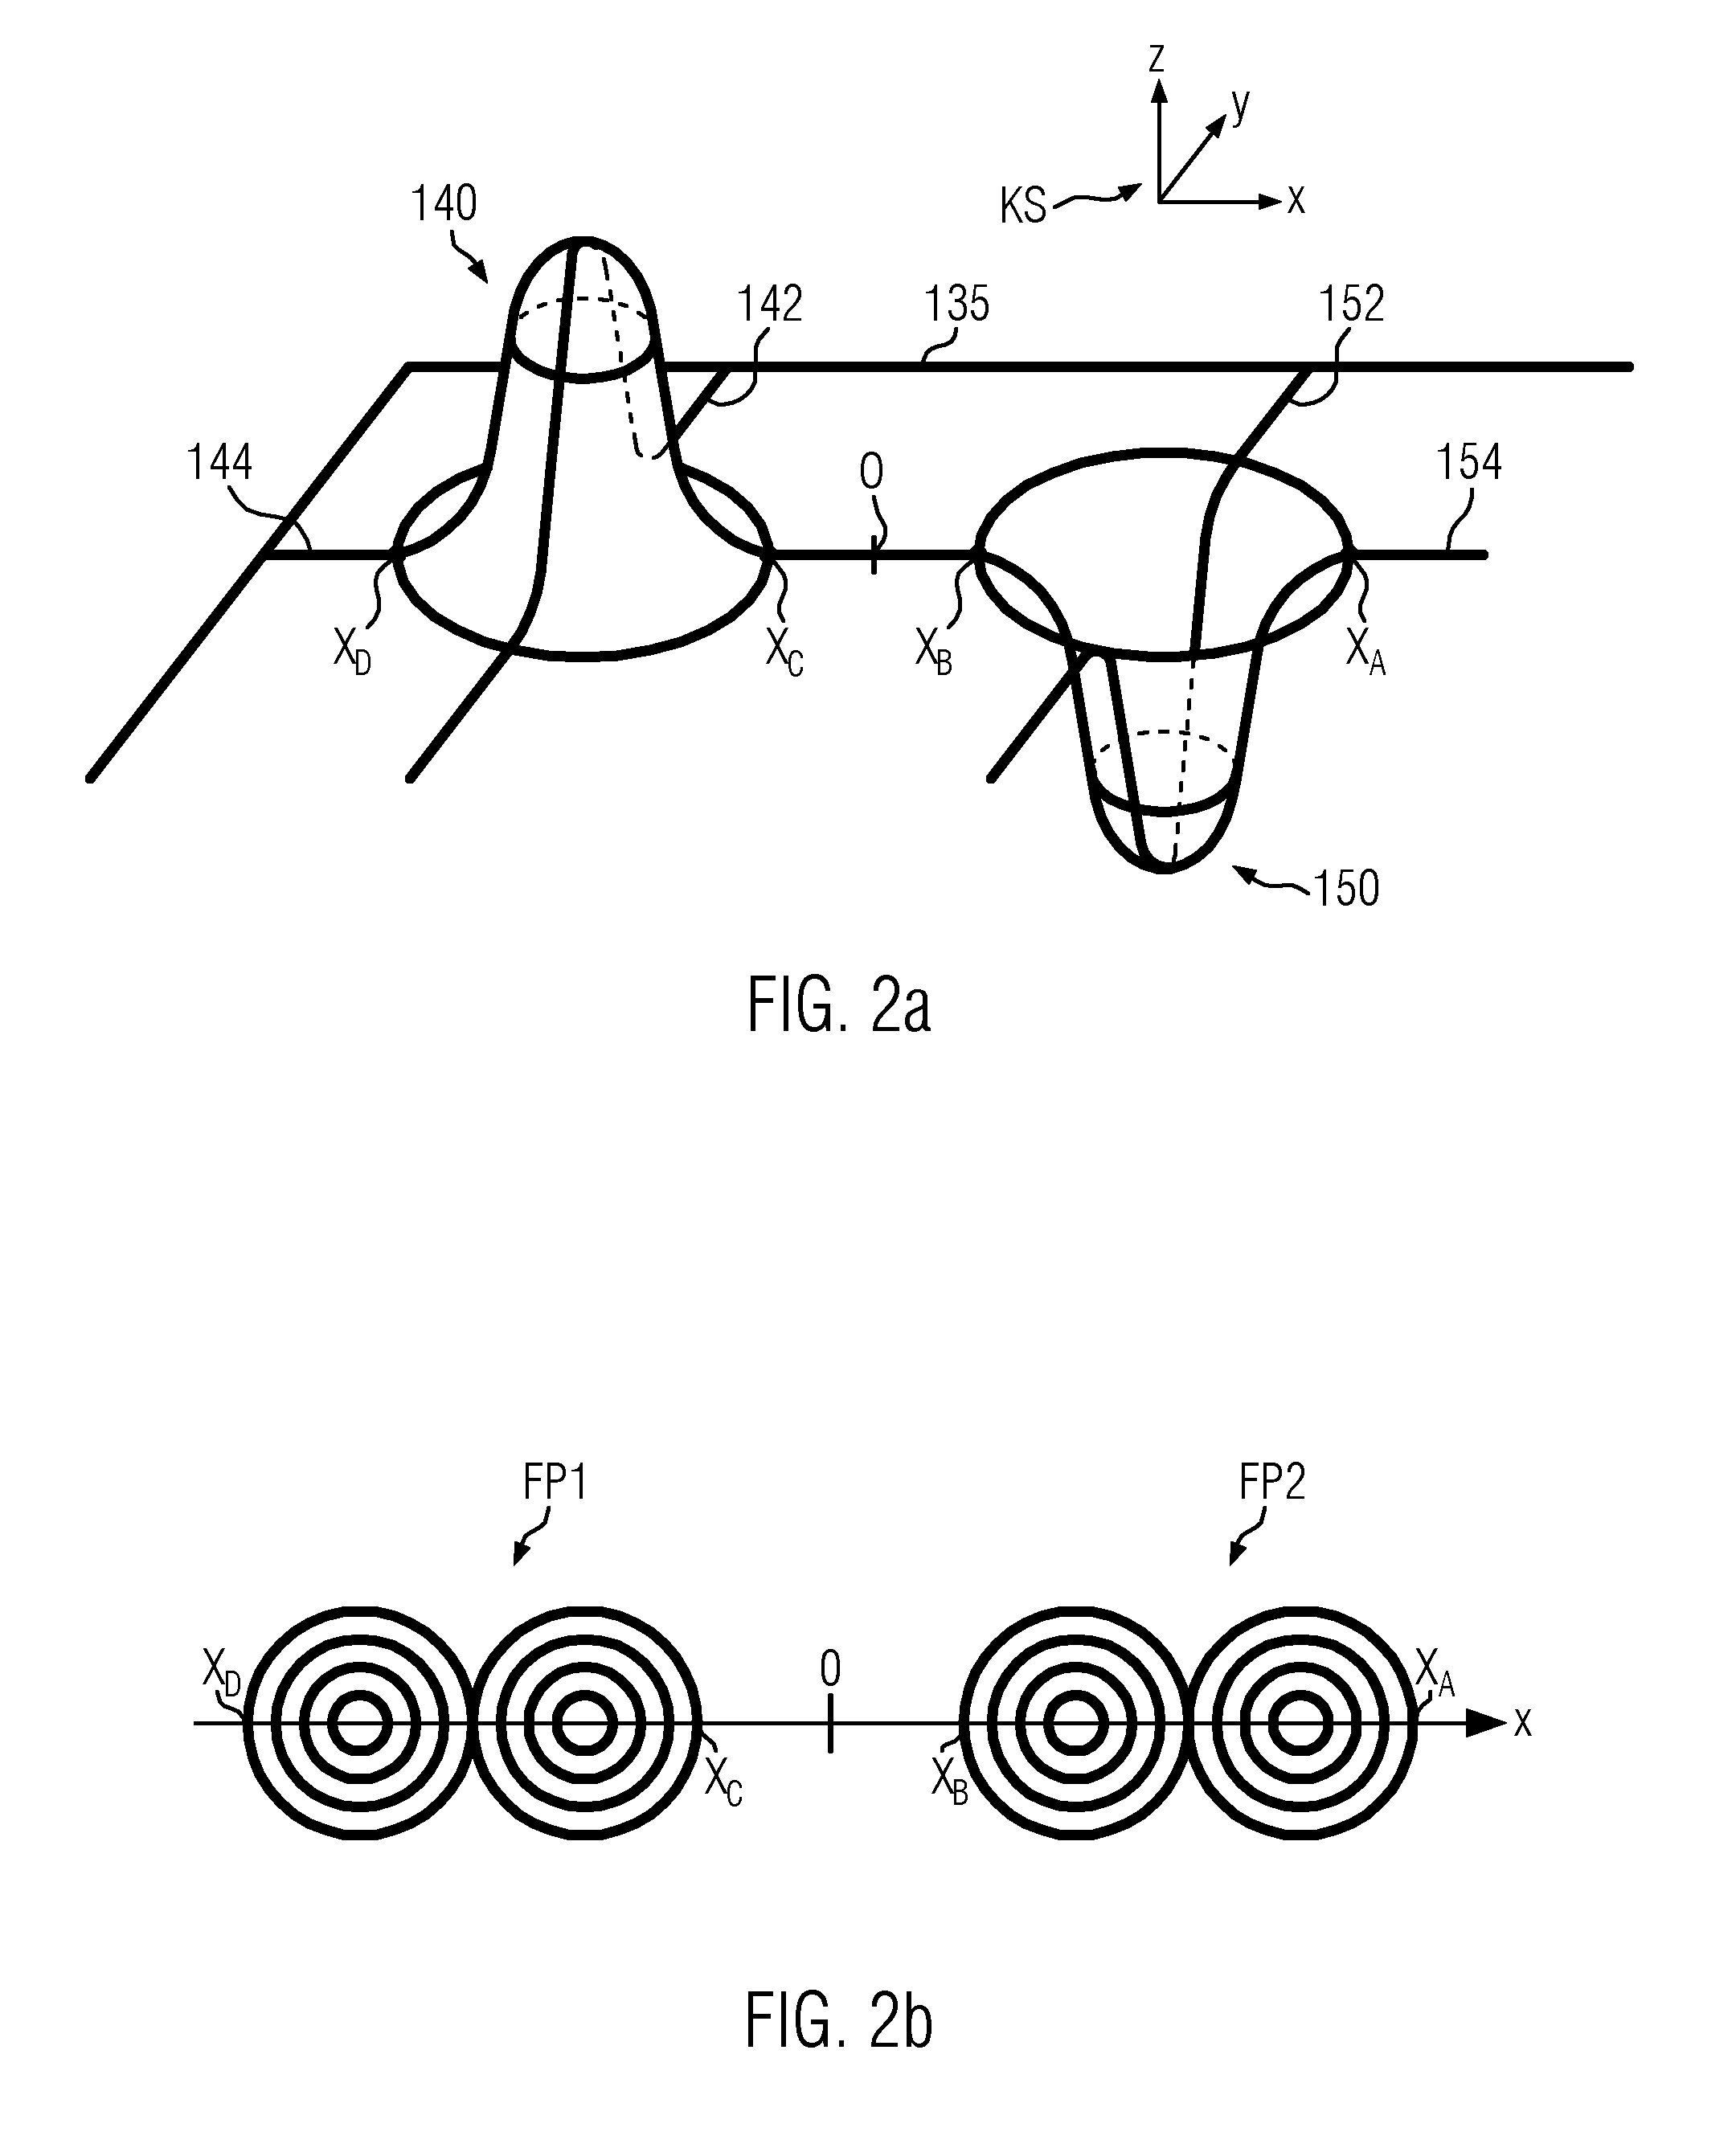 Method of analyzing deformations in a laminated object and according system